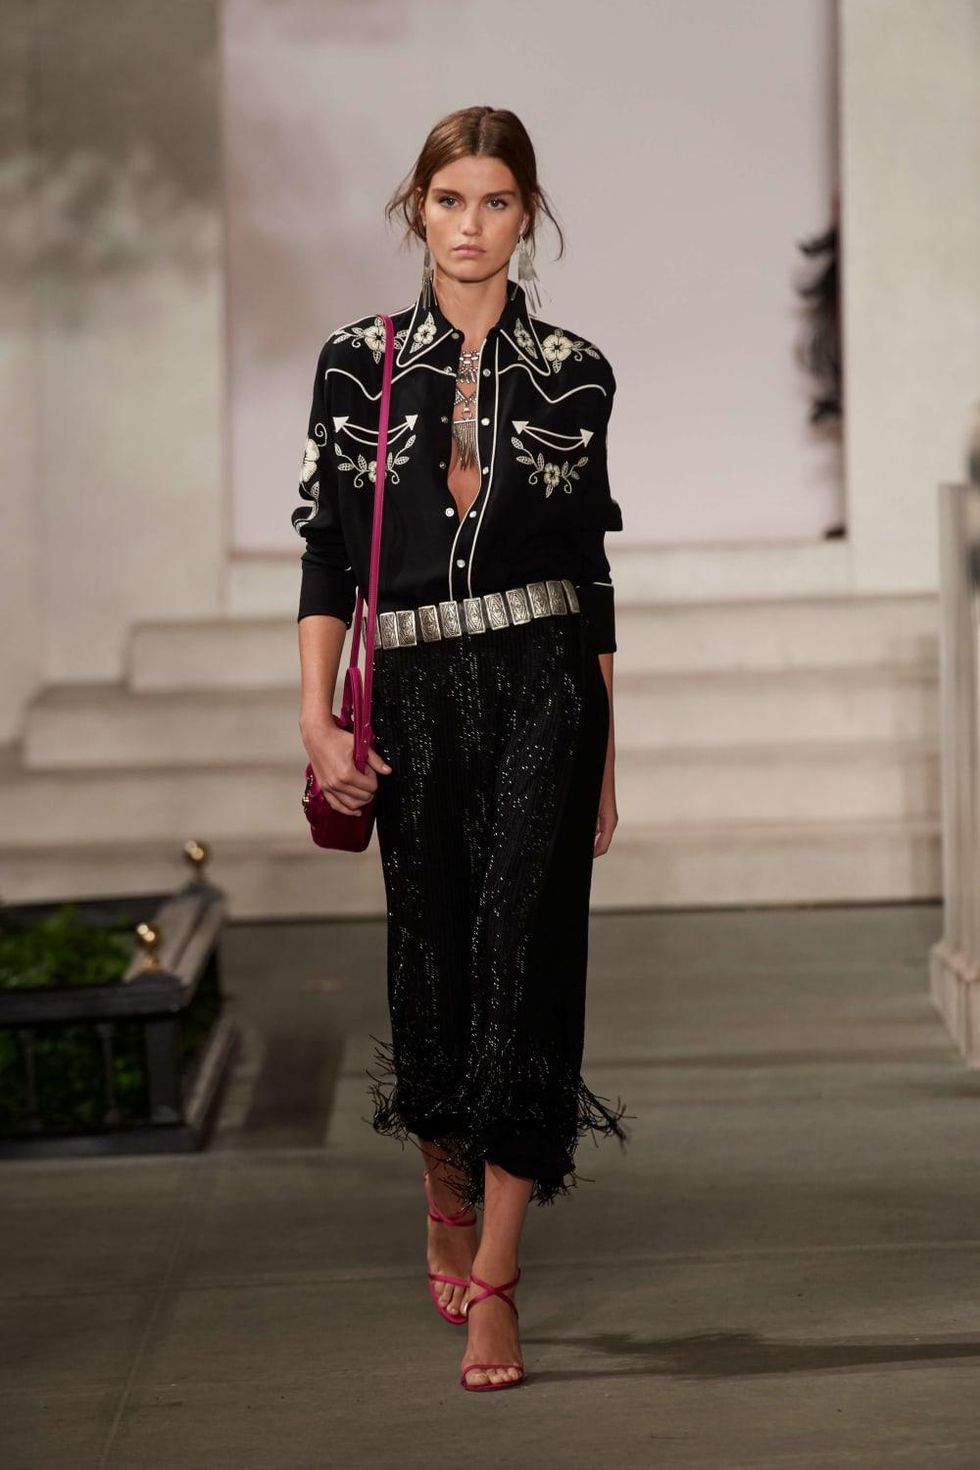 Ralph Lauren is in the driver's seat for a wild ride at opulent runway show  - CultureMap Houston